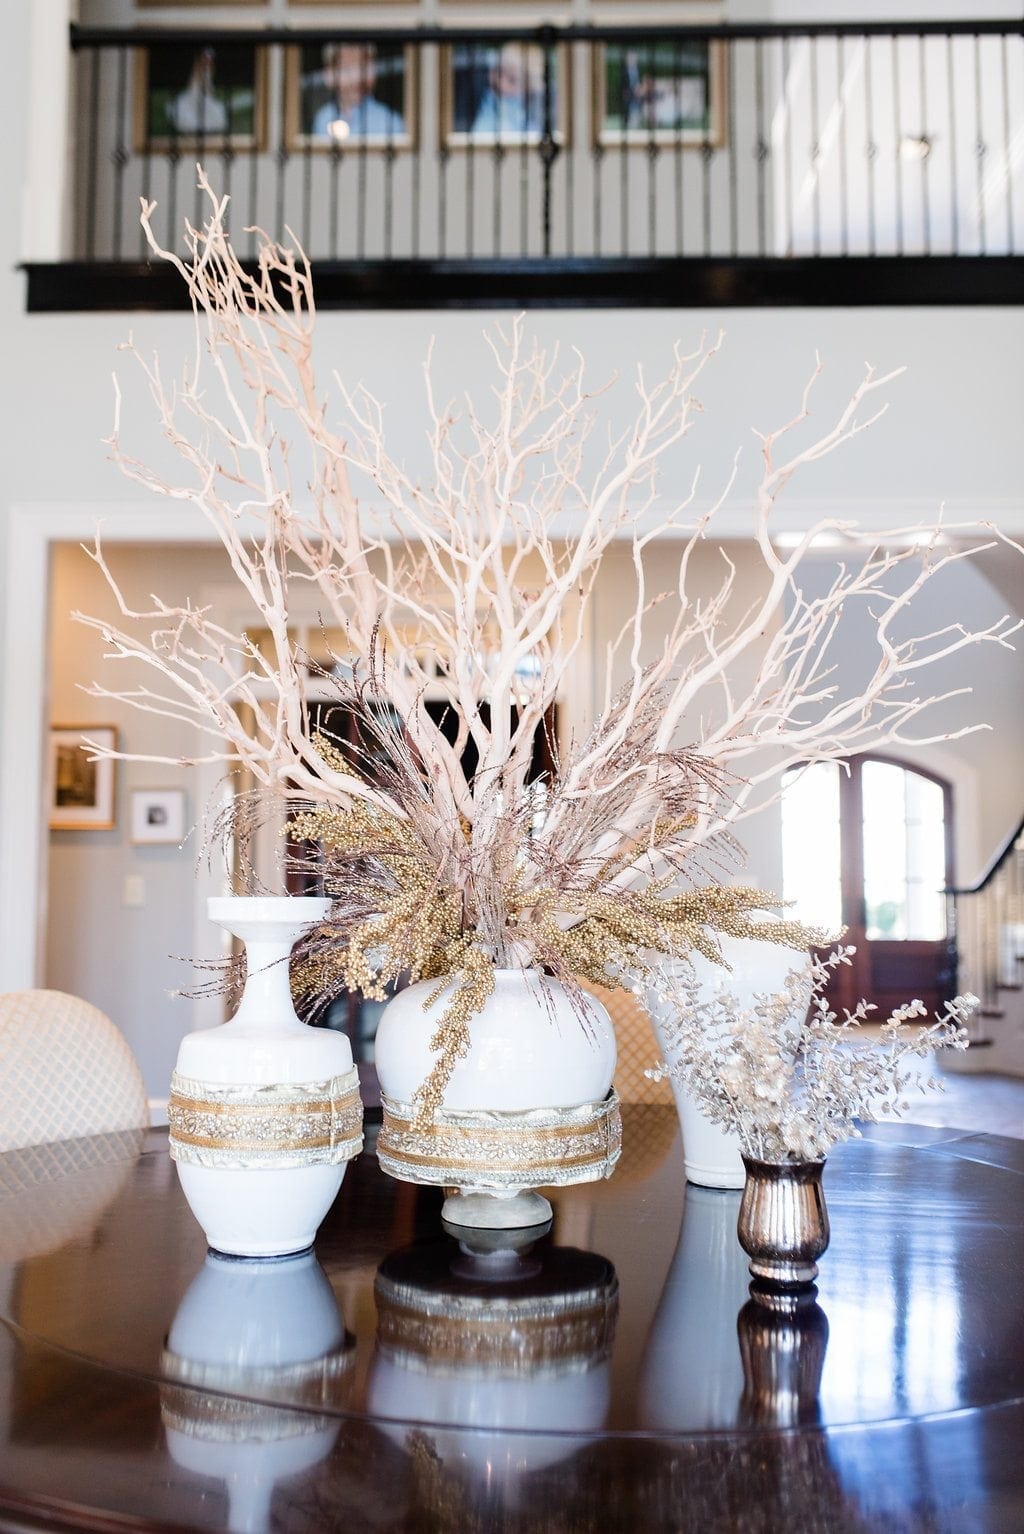 Manzanita Branches used as dining room centerpiece for round dining room table. White urns filled with branches and gold ribbon detail wrapped around urns.